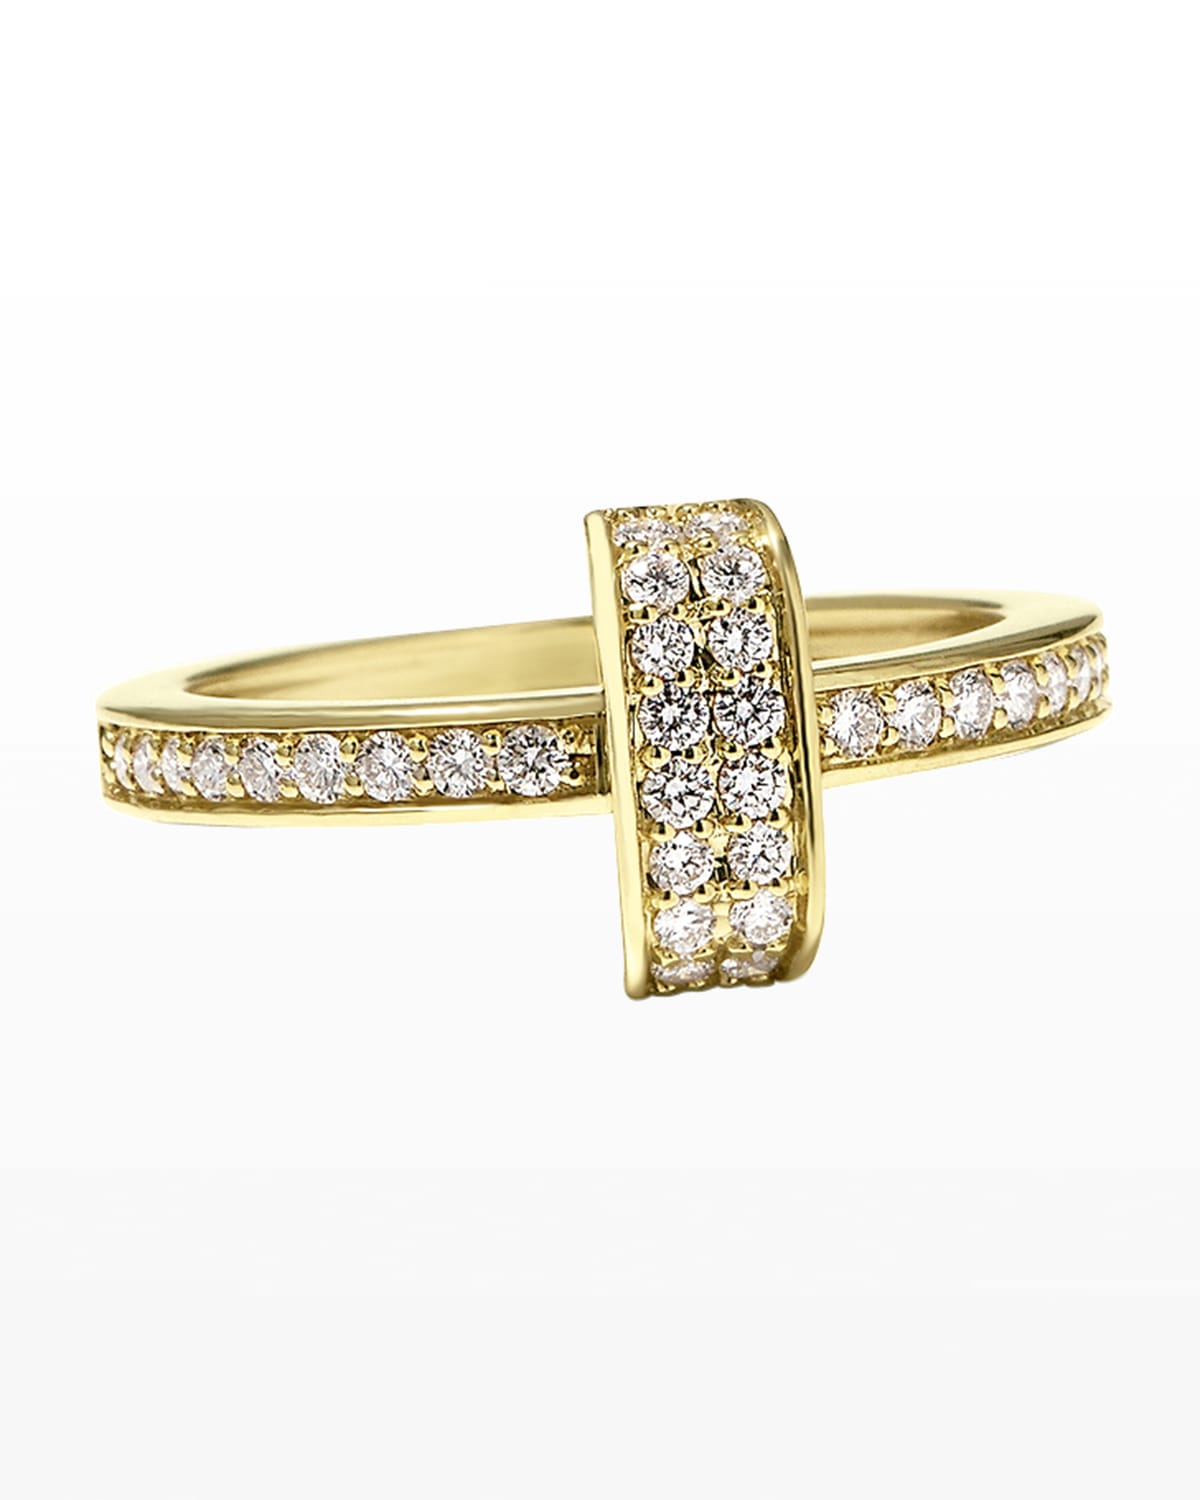 Color Switch 18k Gold and Diamond Ceramic Ring Set